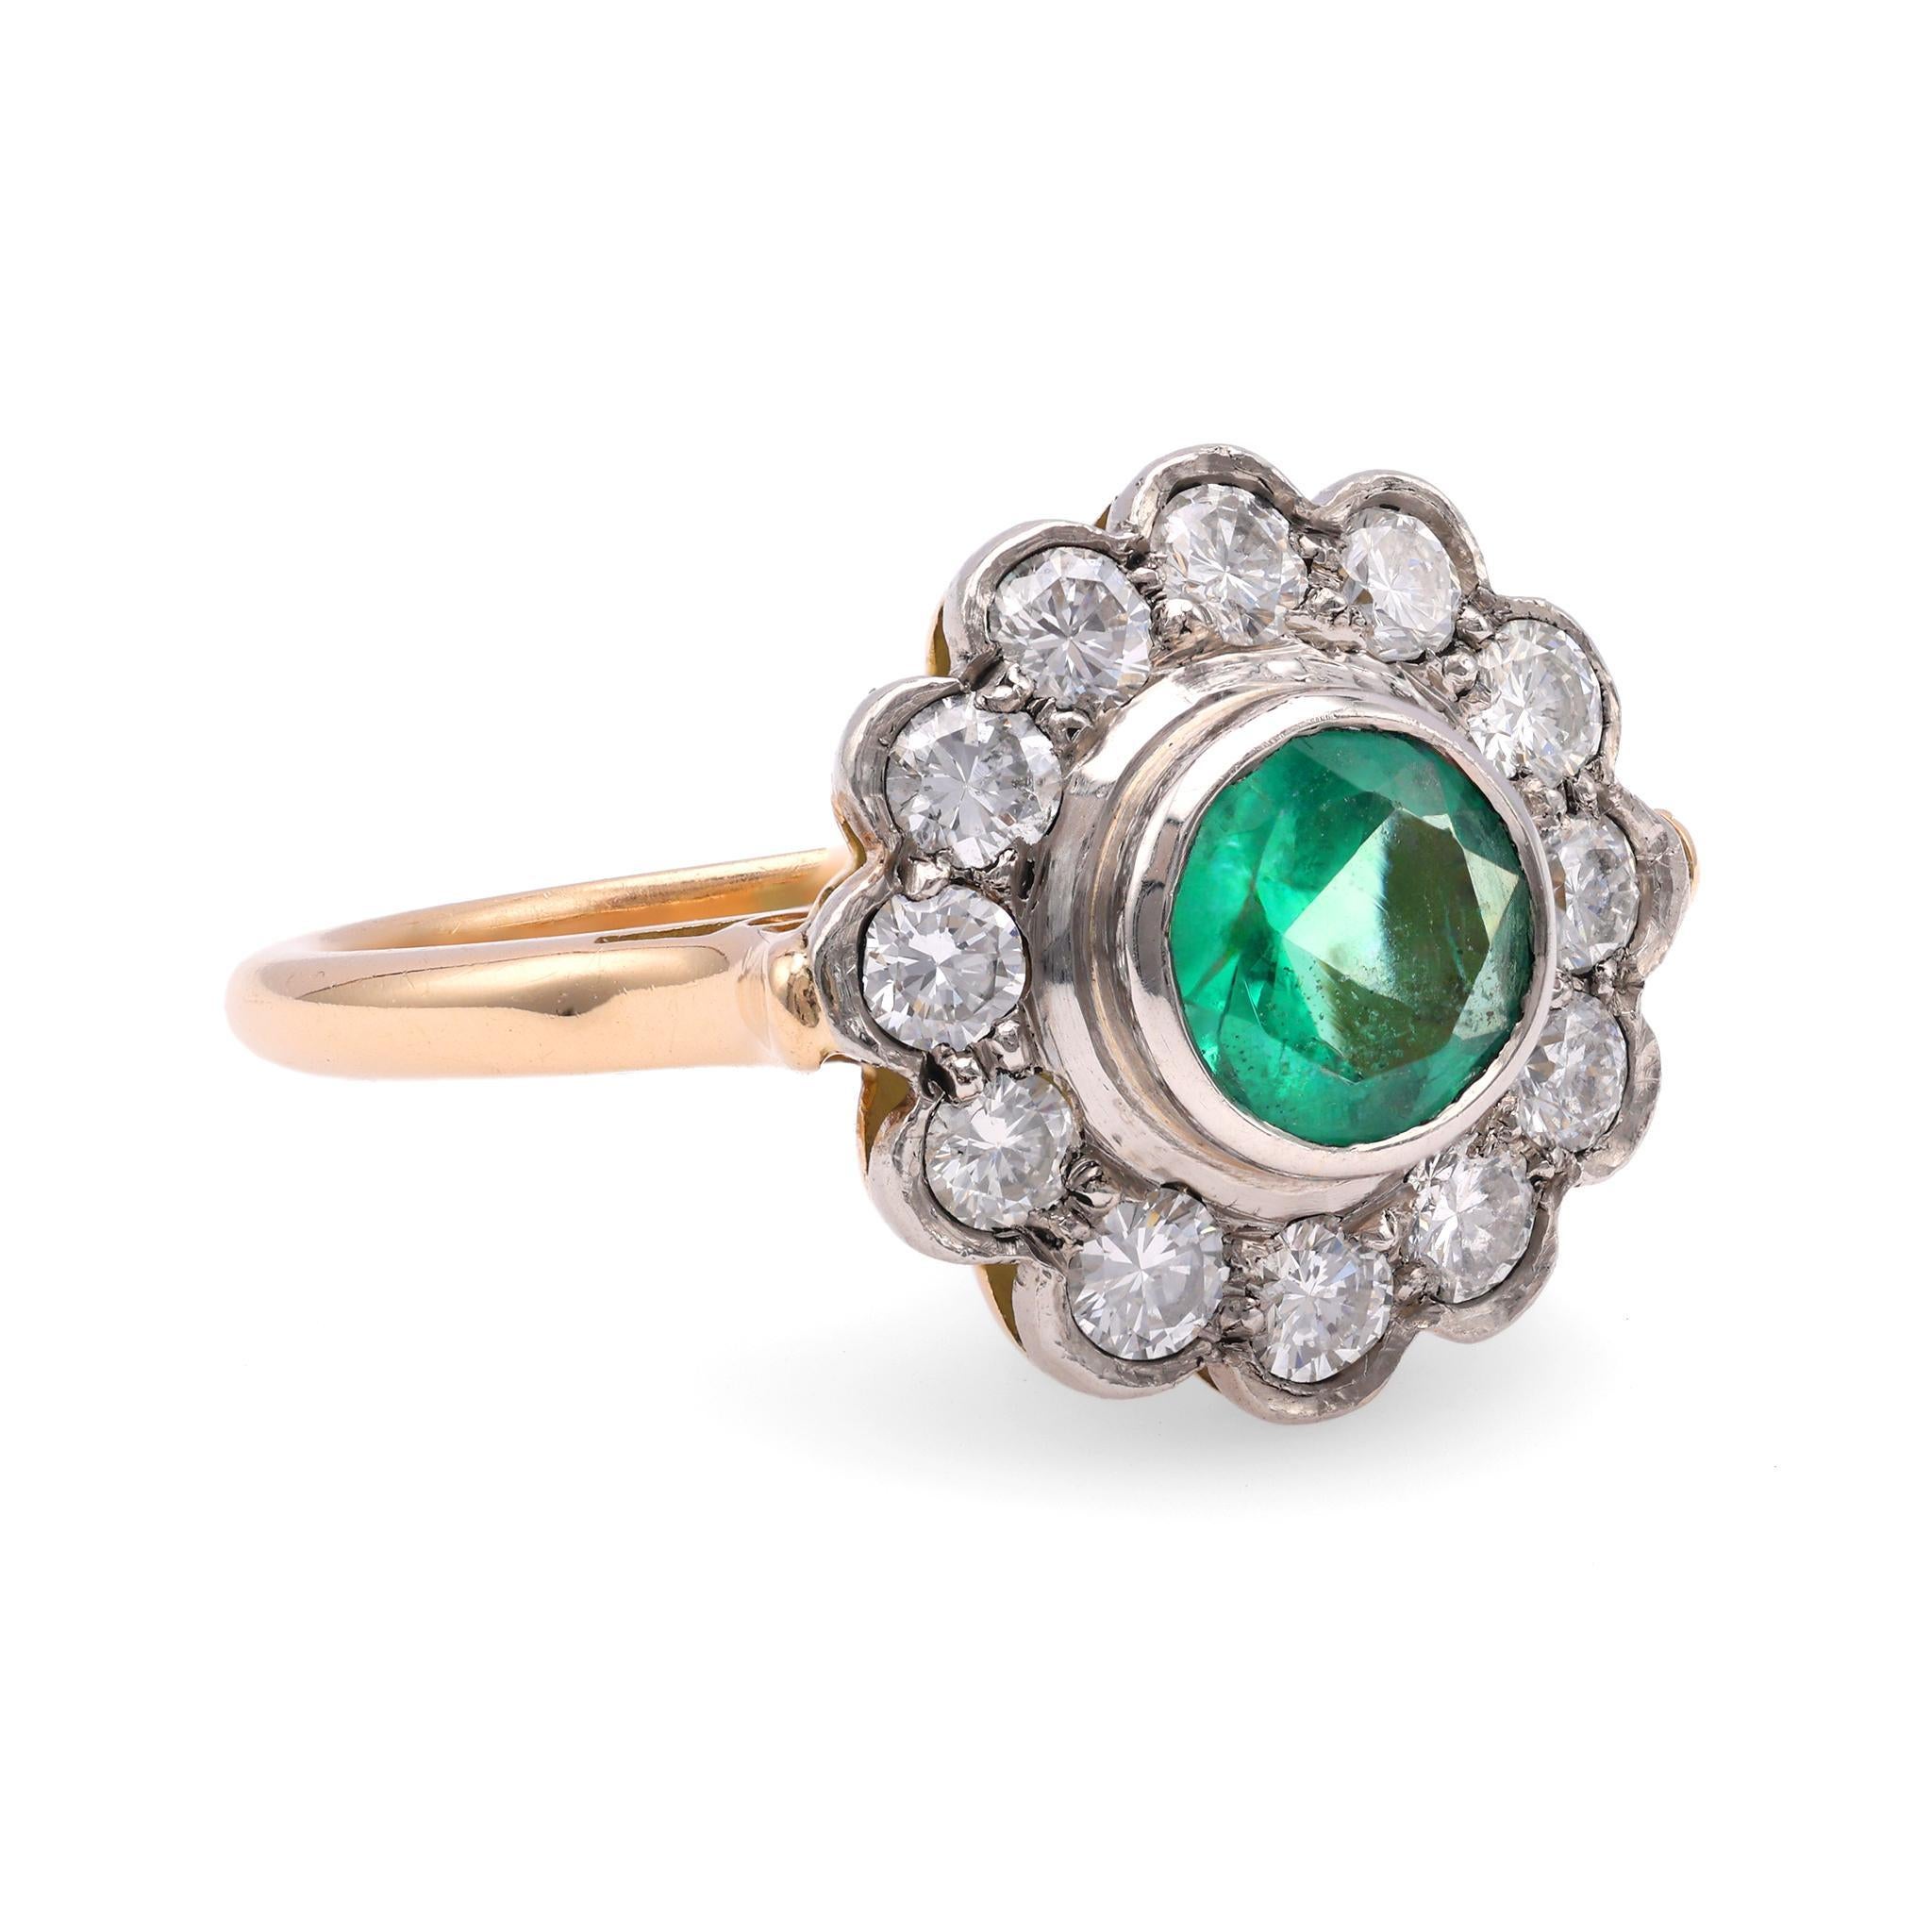 Brilliant Cut One Victorian Revival Emerald Diamond 14k Yellow Gold Platinum Cluster Ring. For Sale